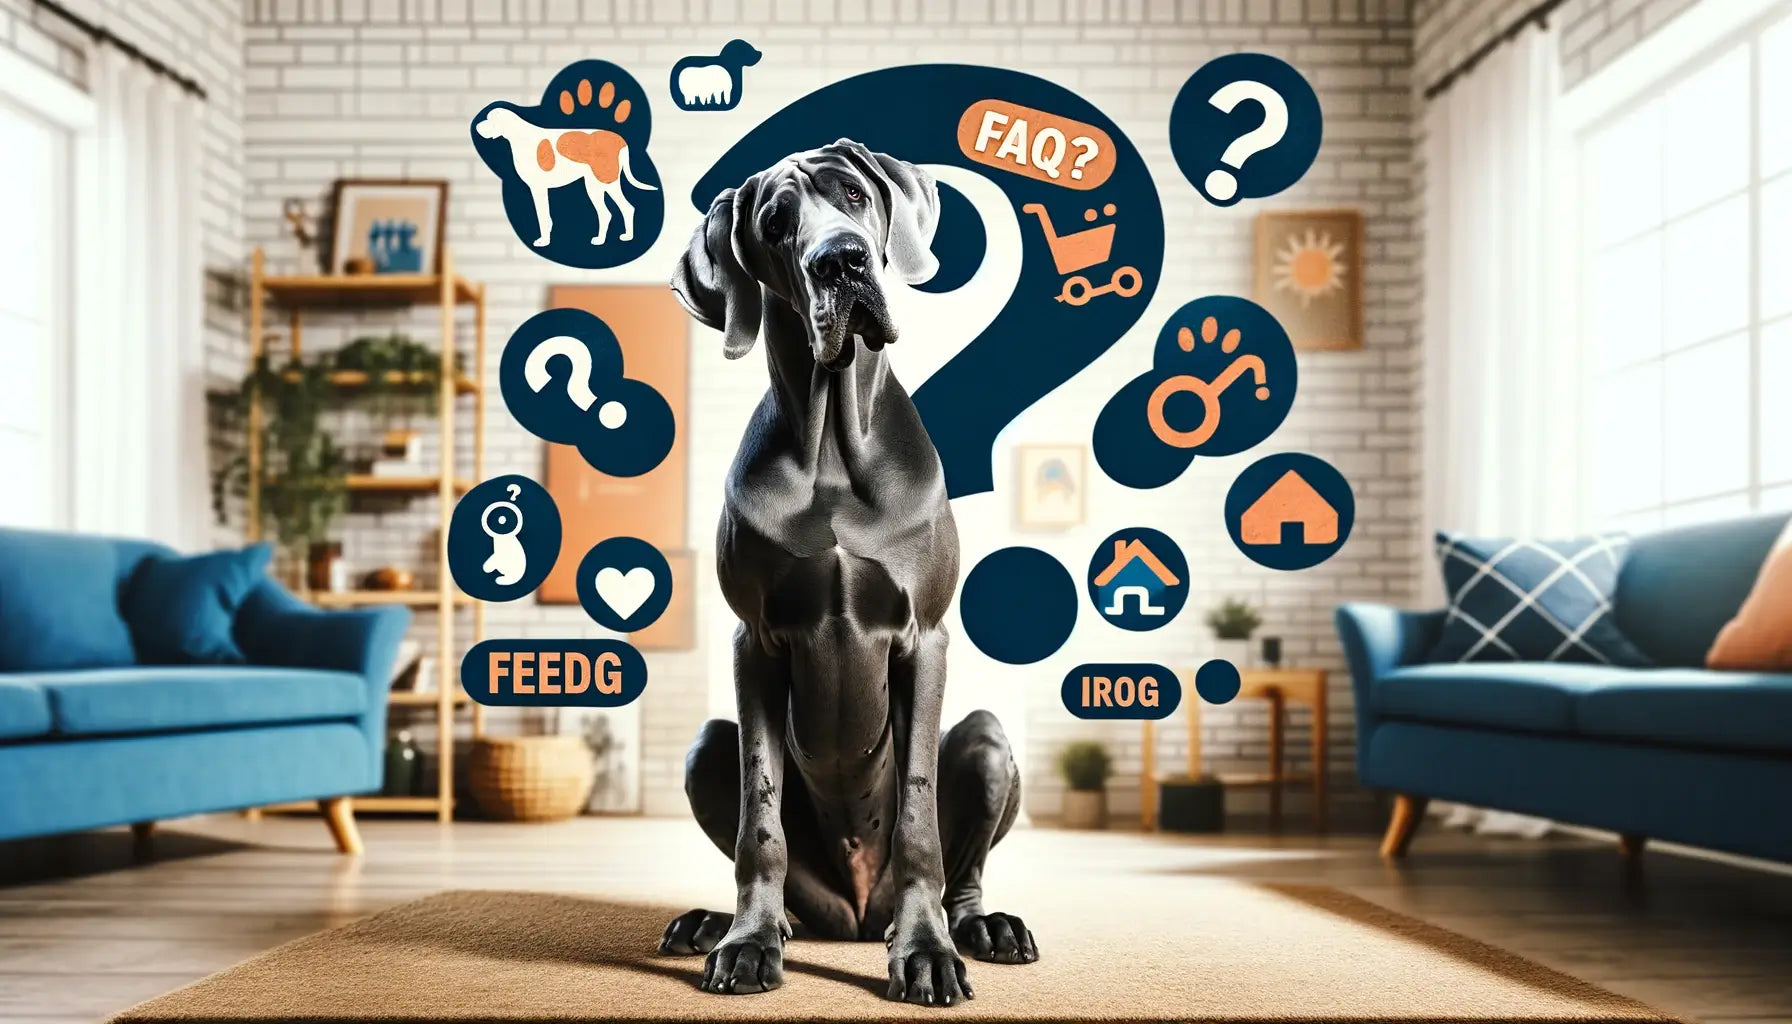 Blue Great Dane with a question mark above its head in a home setting, surrounded by icons representing common questions about the breed.